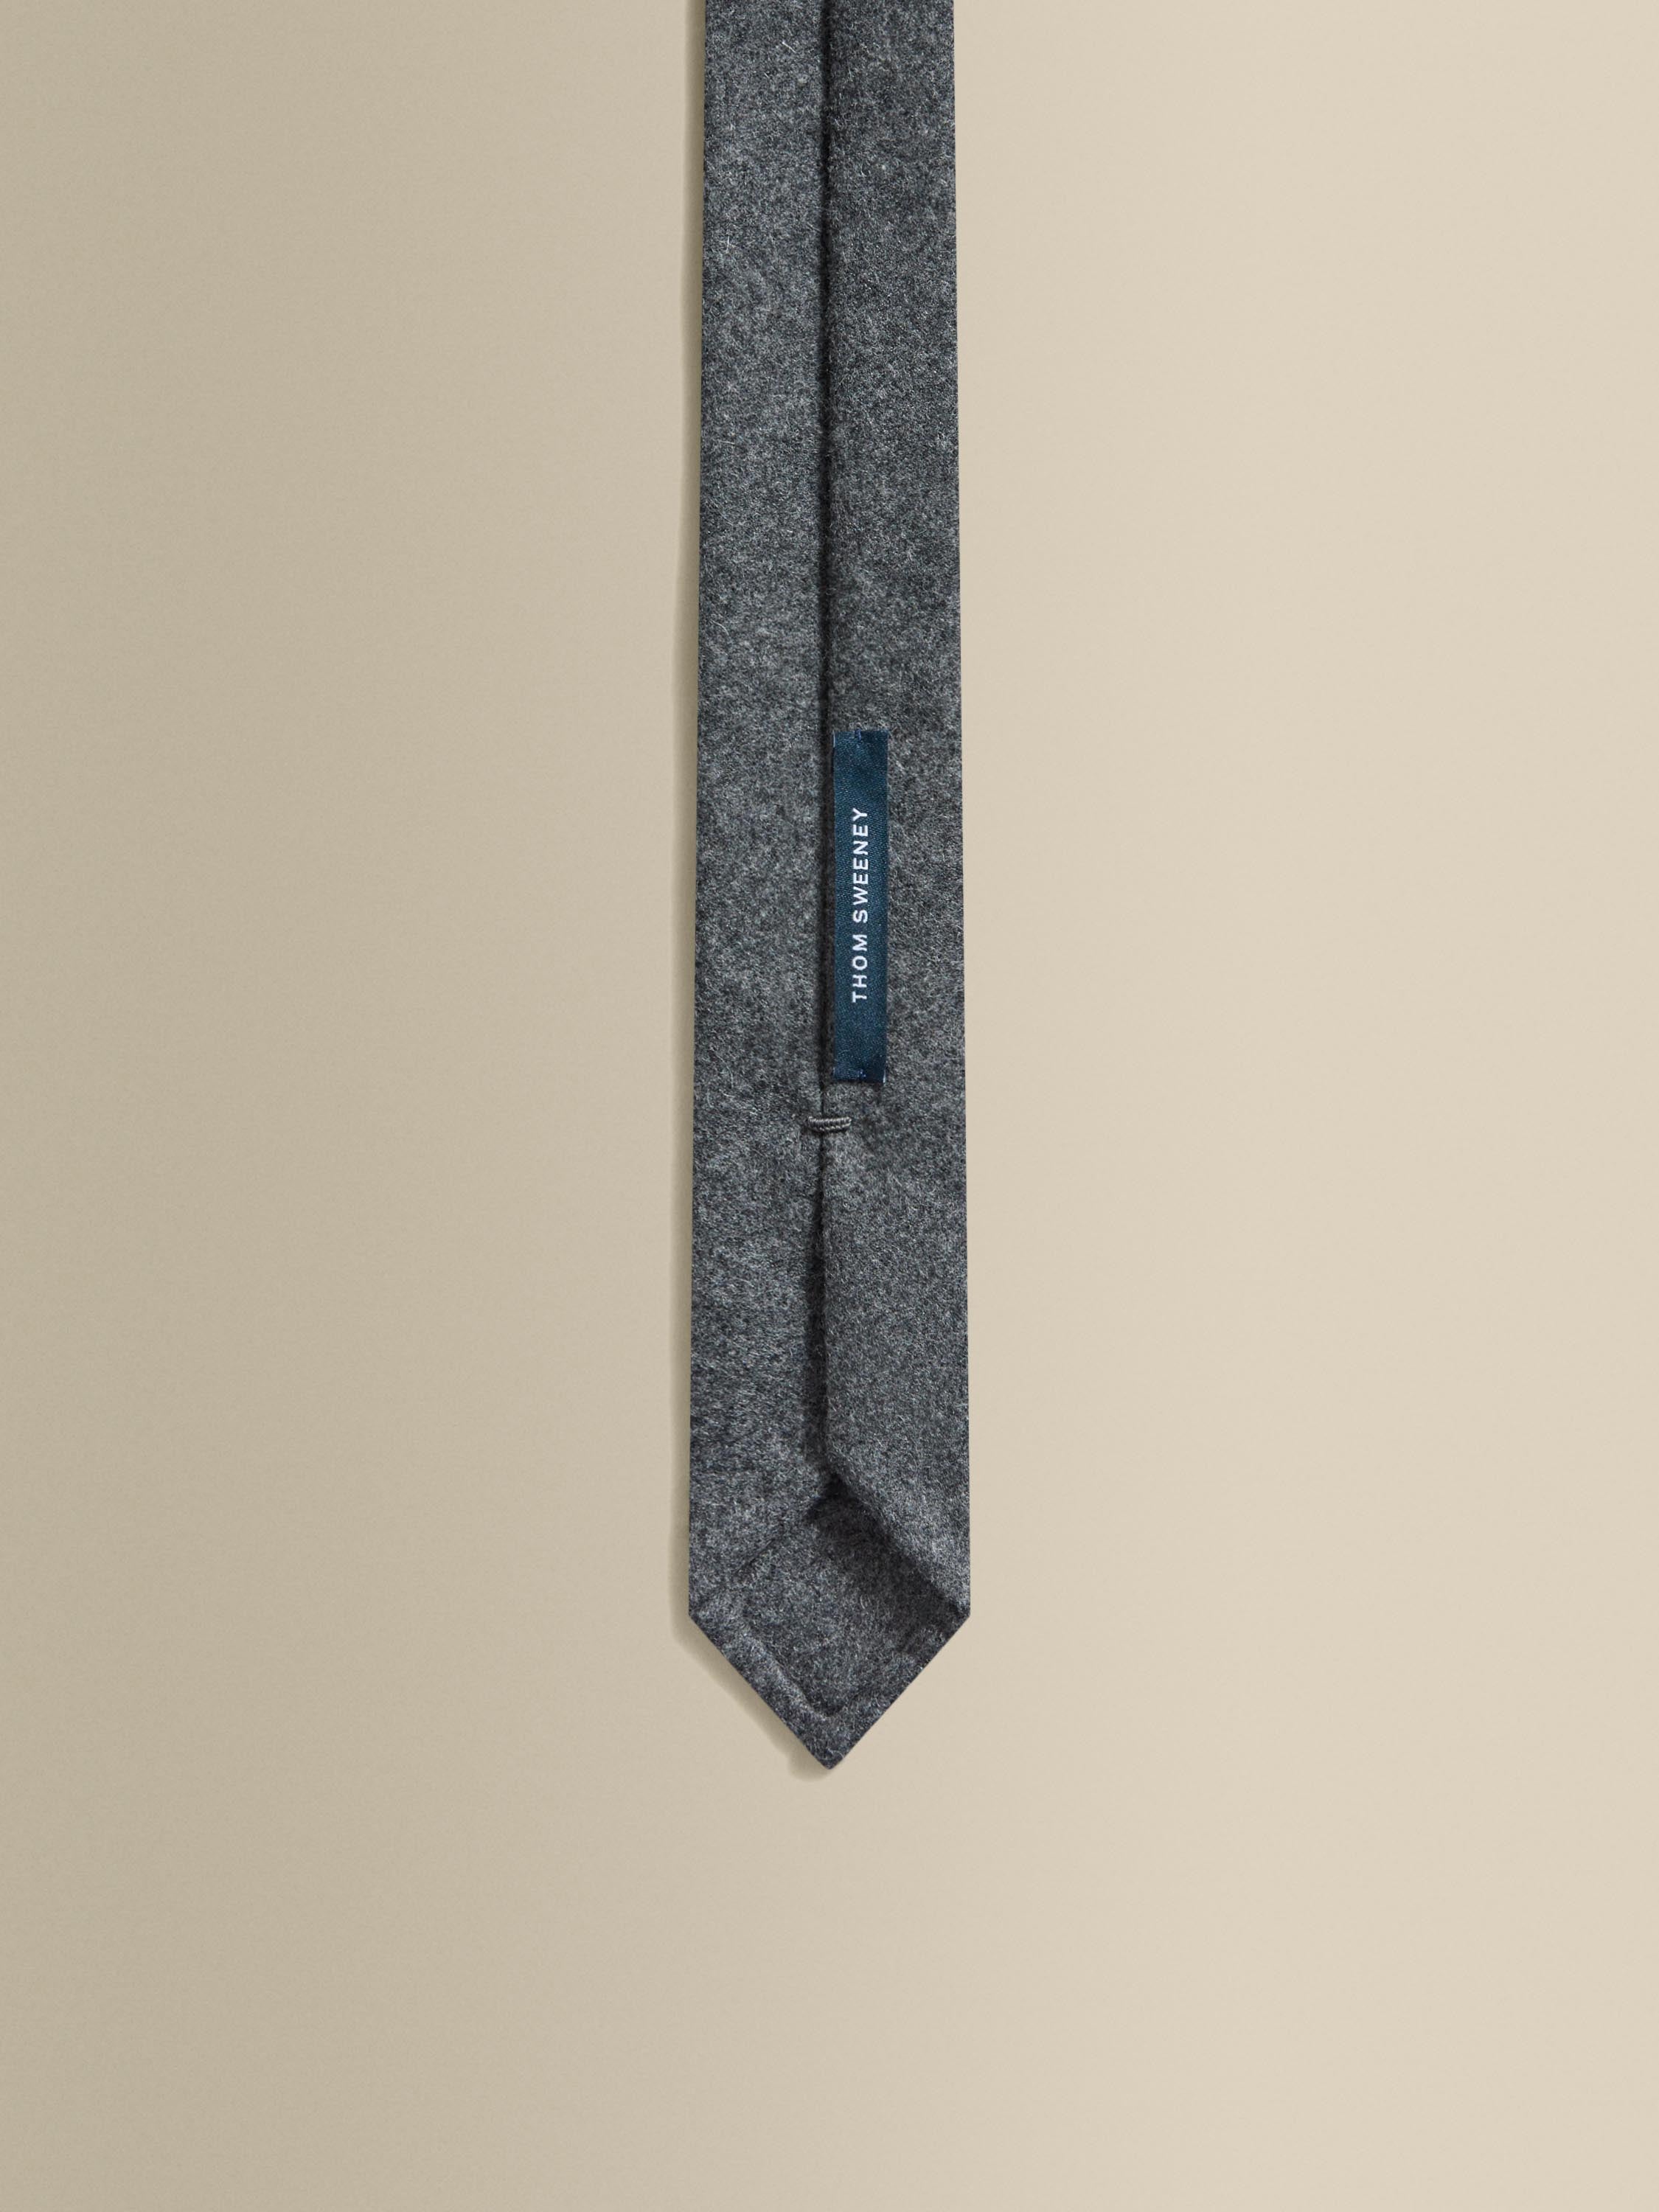 Cashmere Tie Charcoal Inside Label Product Image